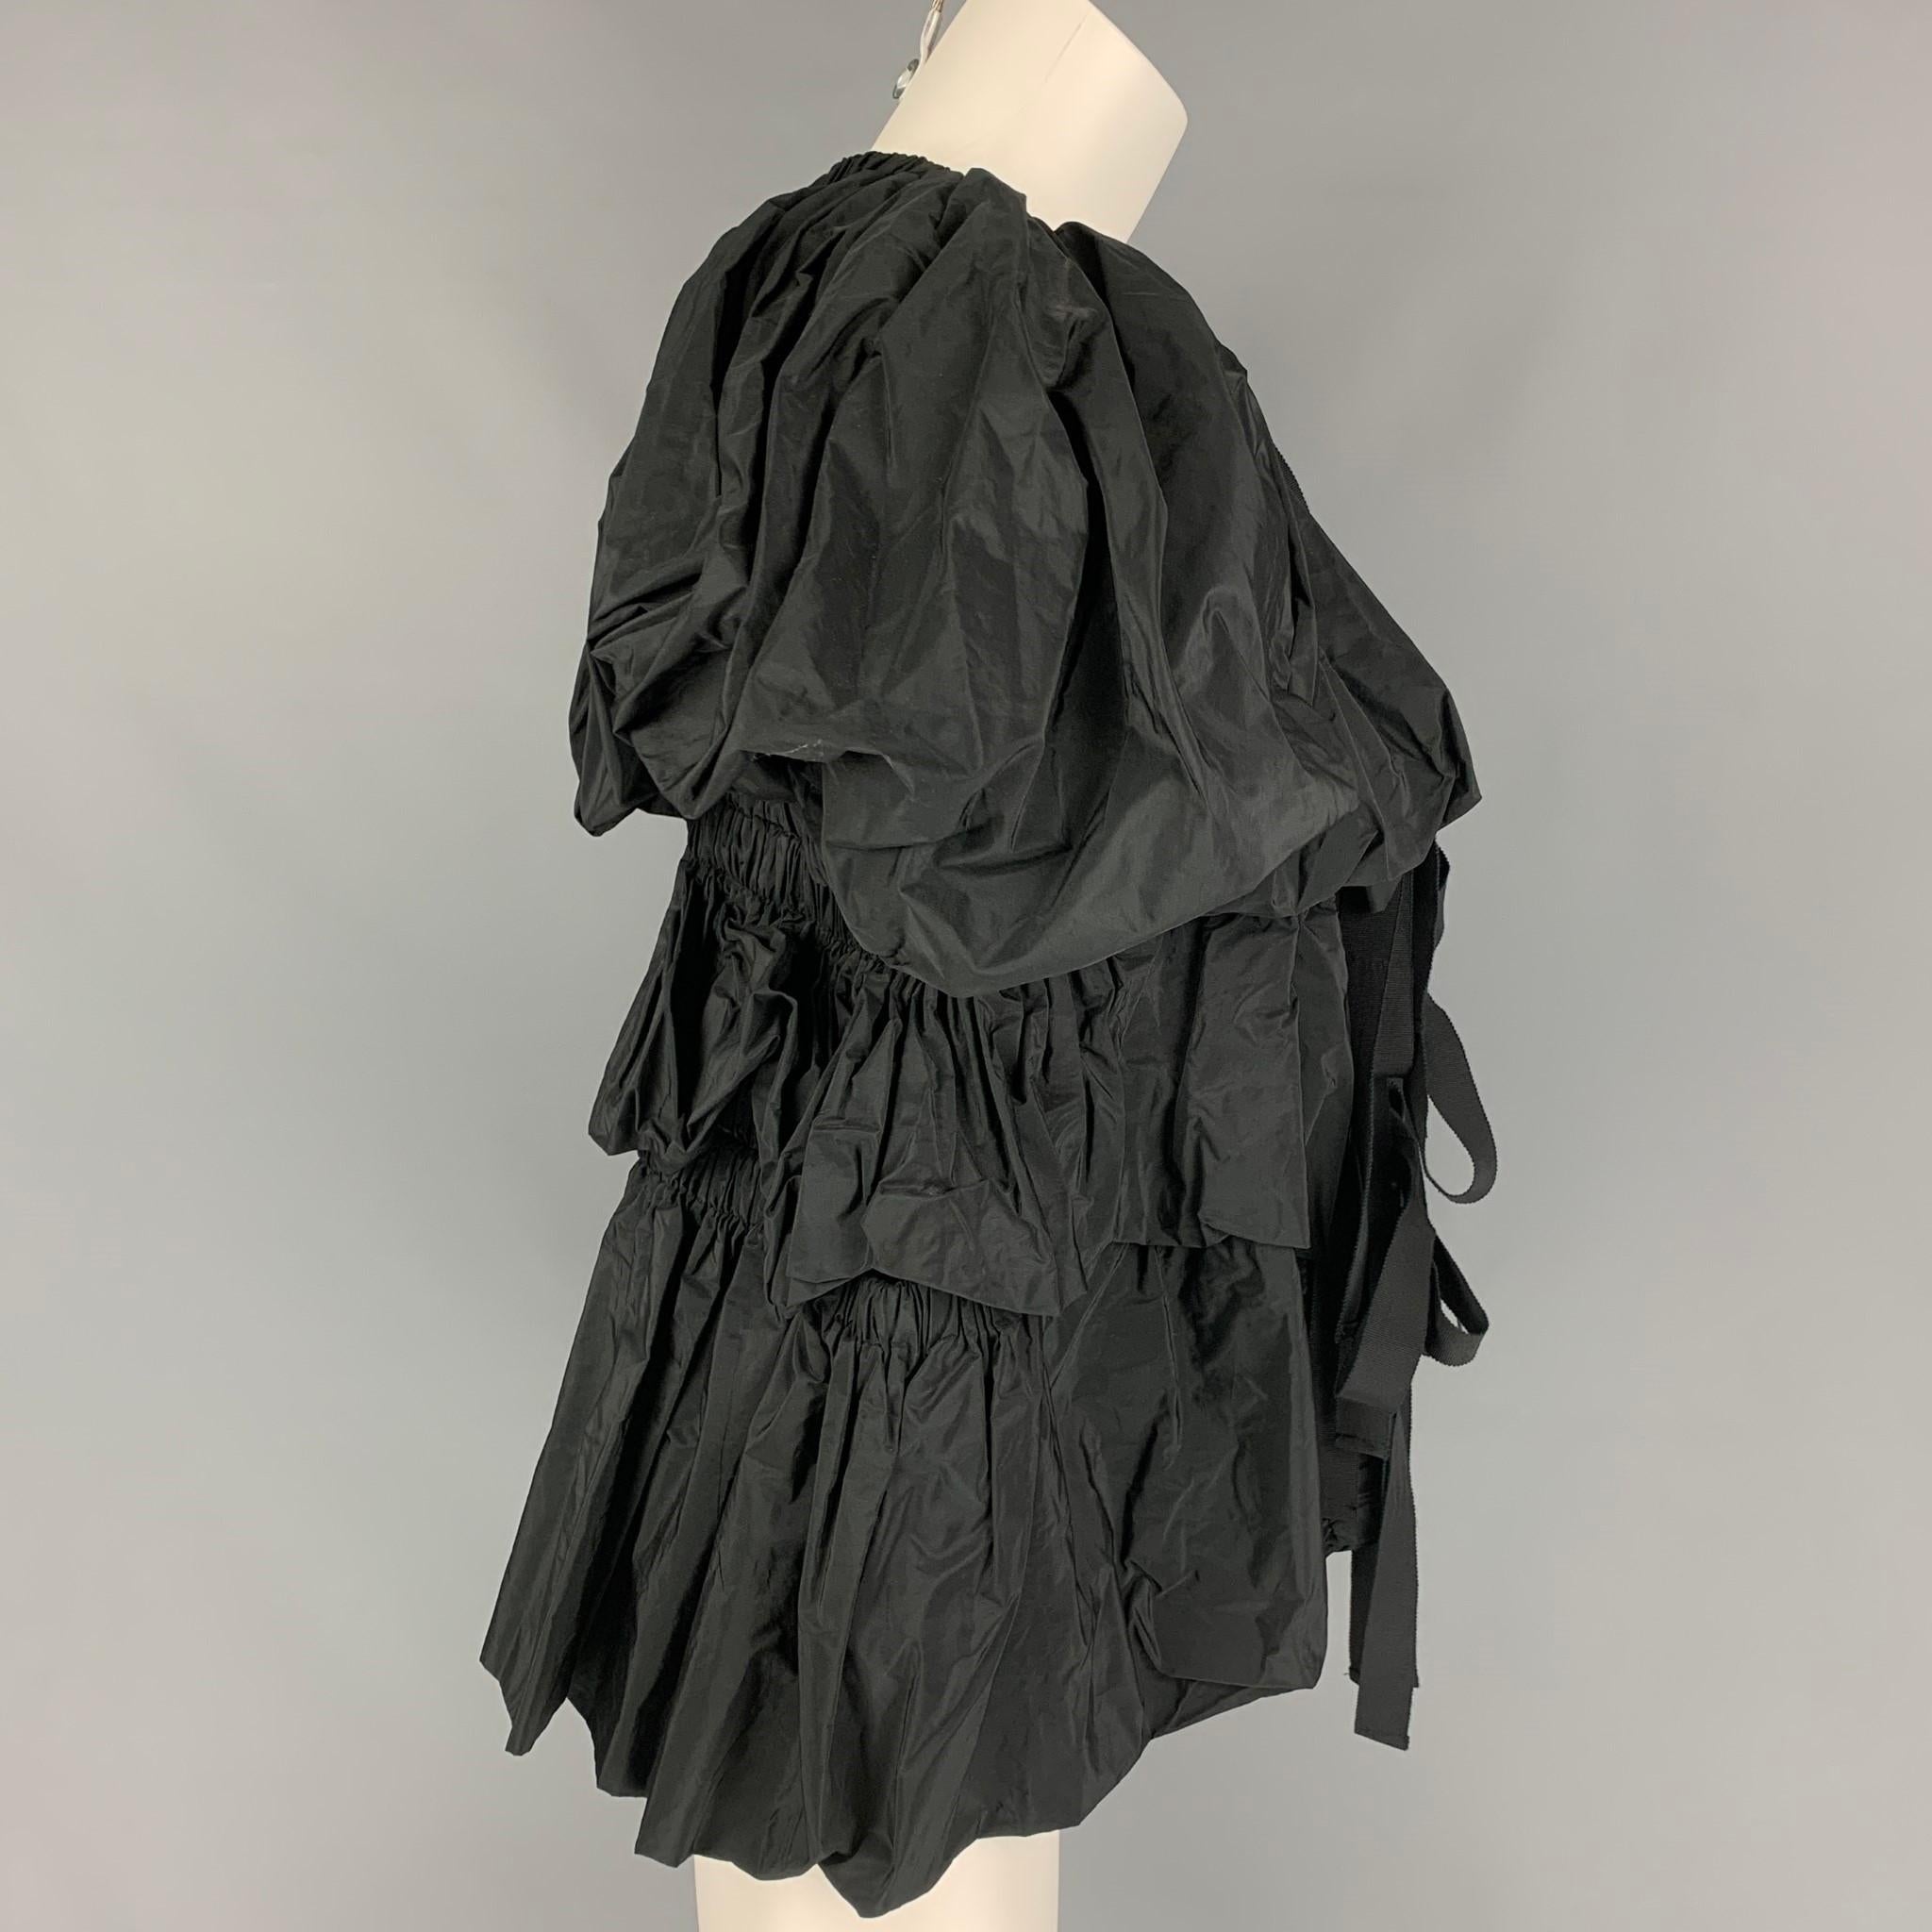 DRIES VAN NOTEN SS 20 jacket comes in a black taffeta polyester featuring a oversized loose fit, puff sleeves, elastic details, and a self tie closure. 

New With Tags. 
Marked: XS
Original Retail Price: $1,050.00

Measurements:

Shoulder: 18